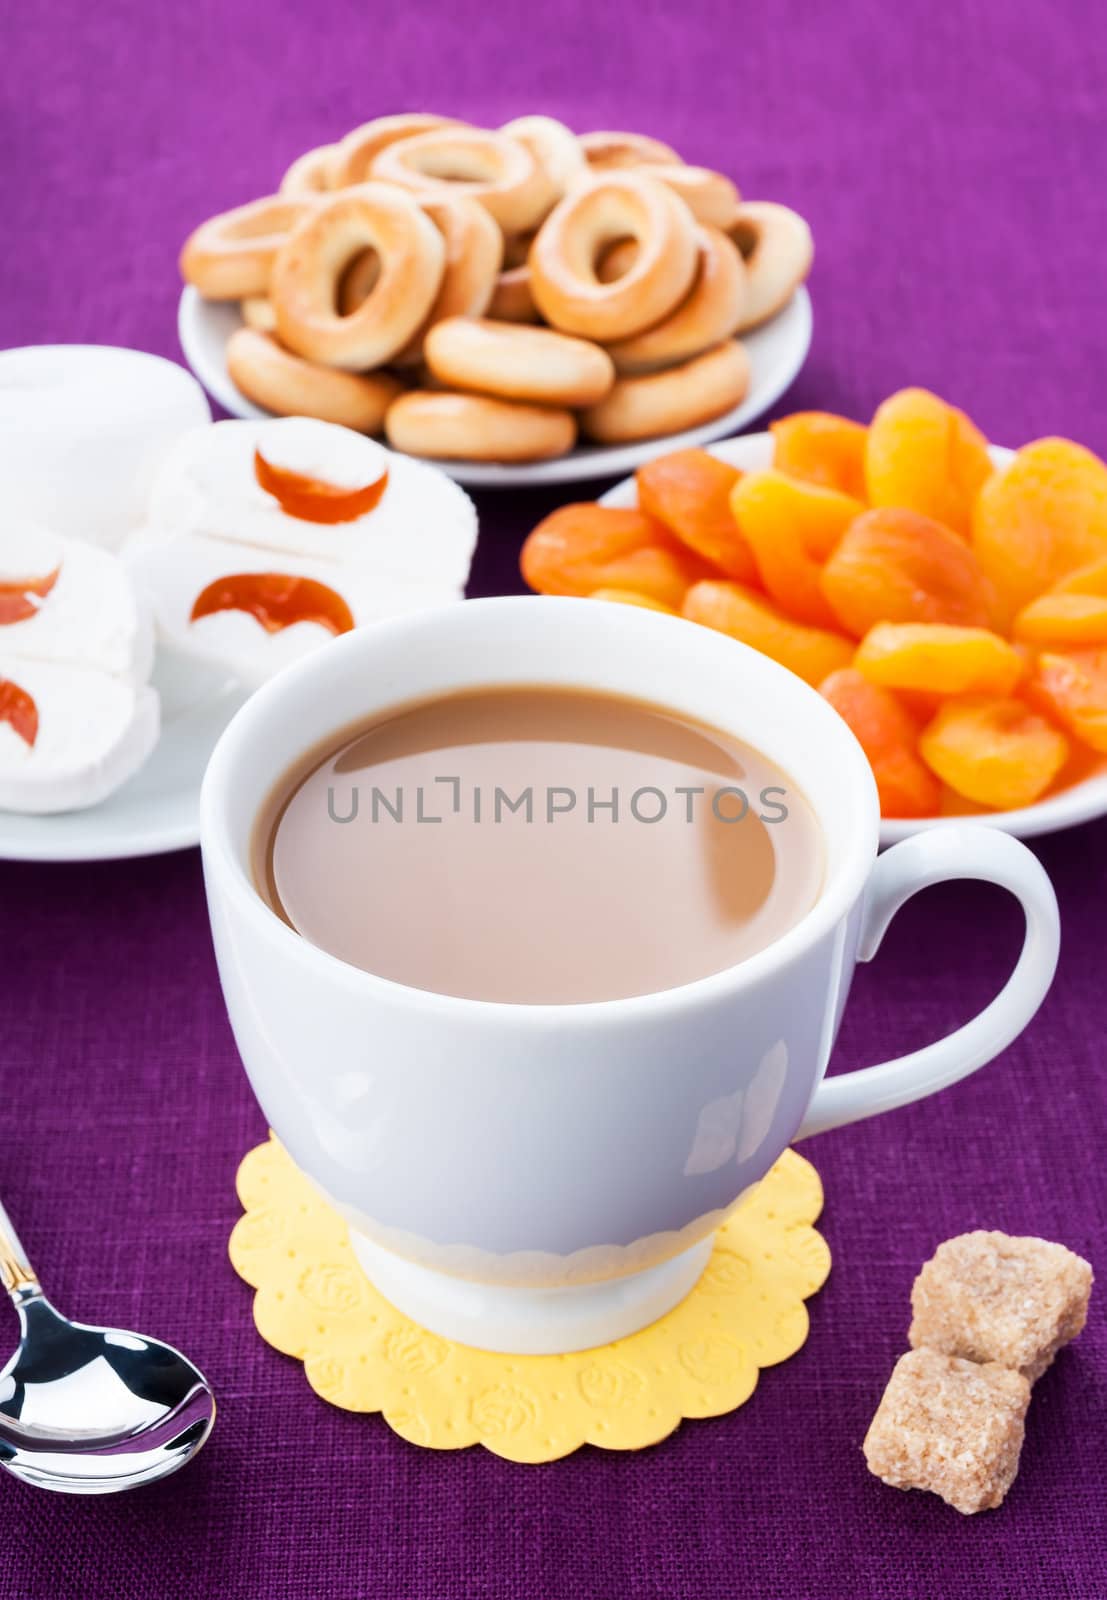 White cup of coffee with breakfast items on the lilac textured linen napkin